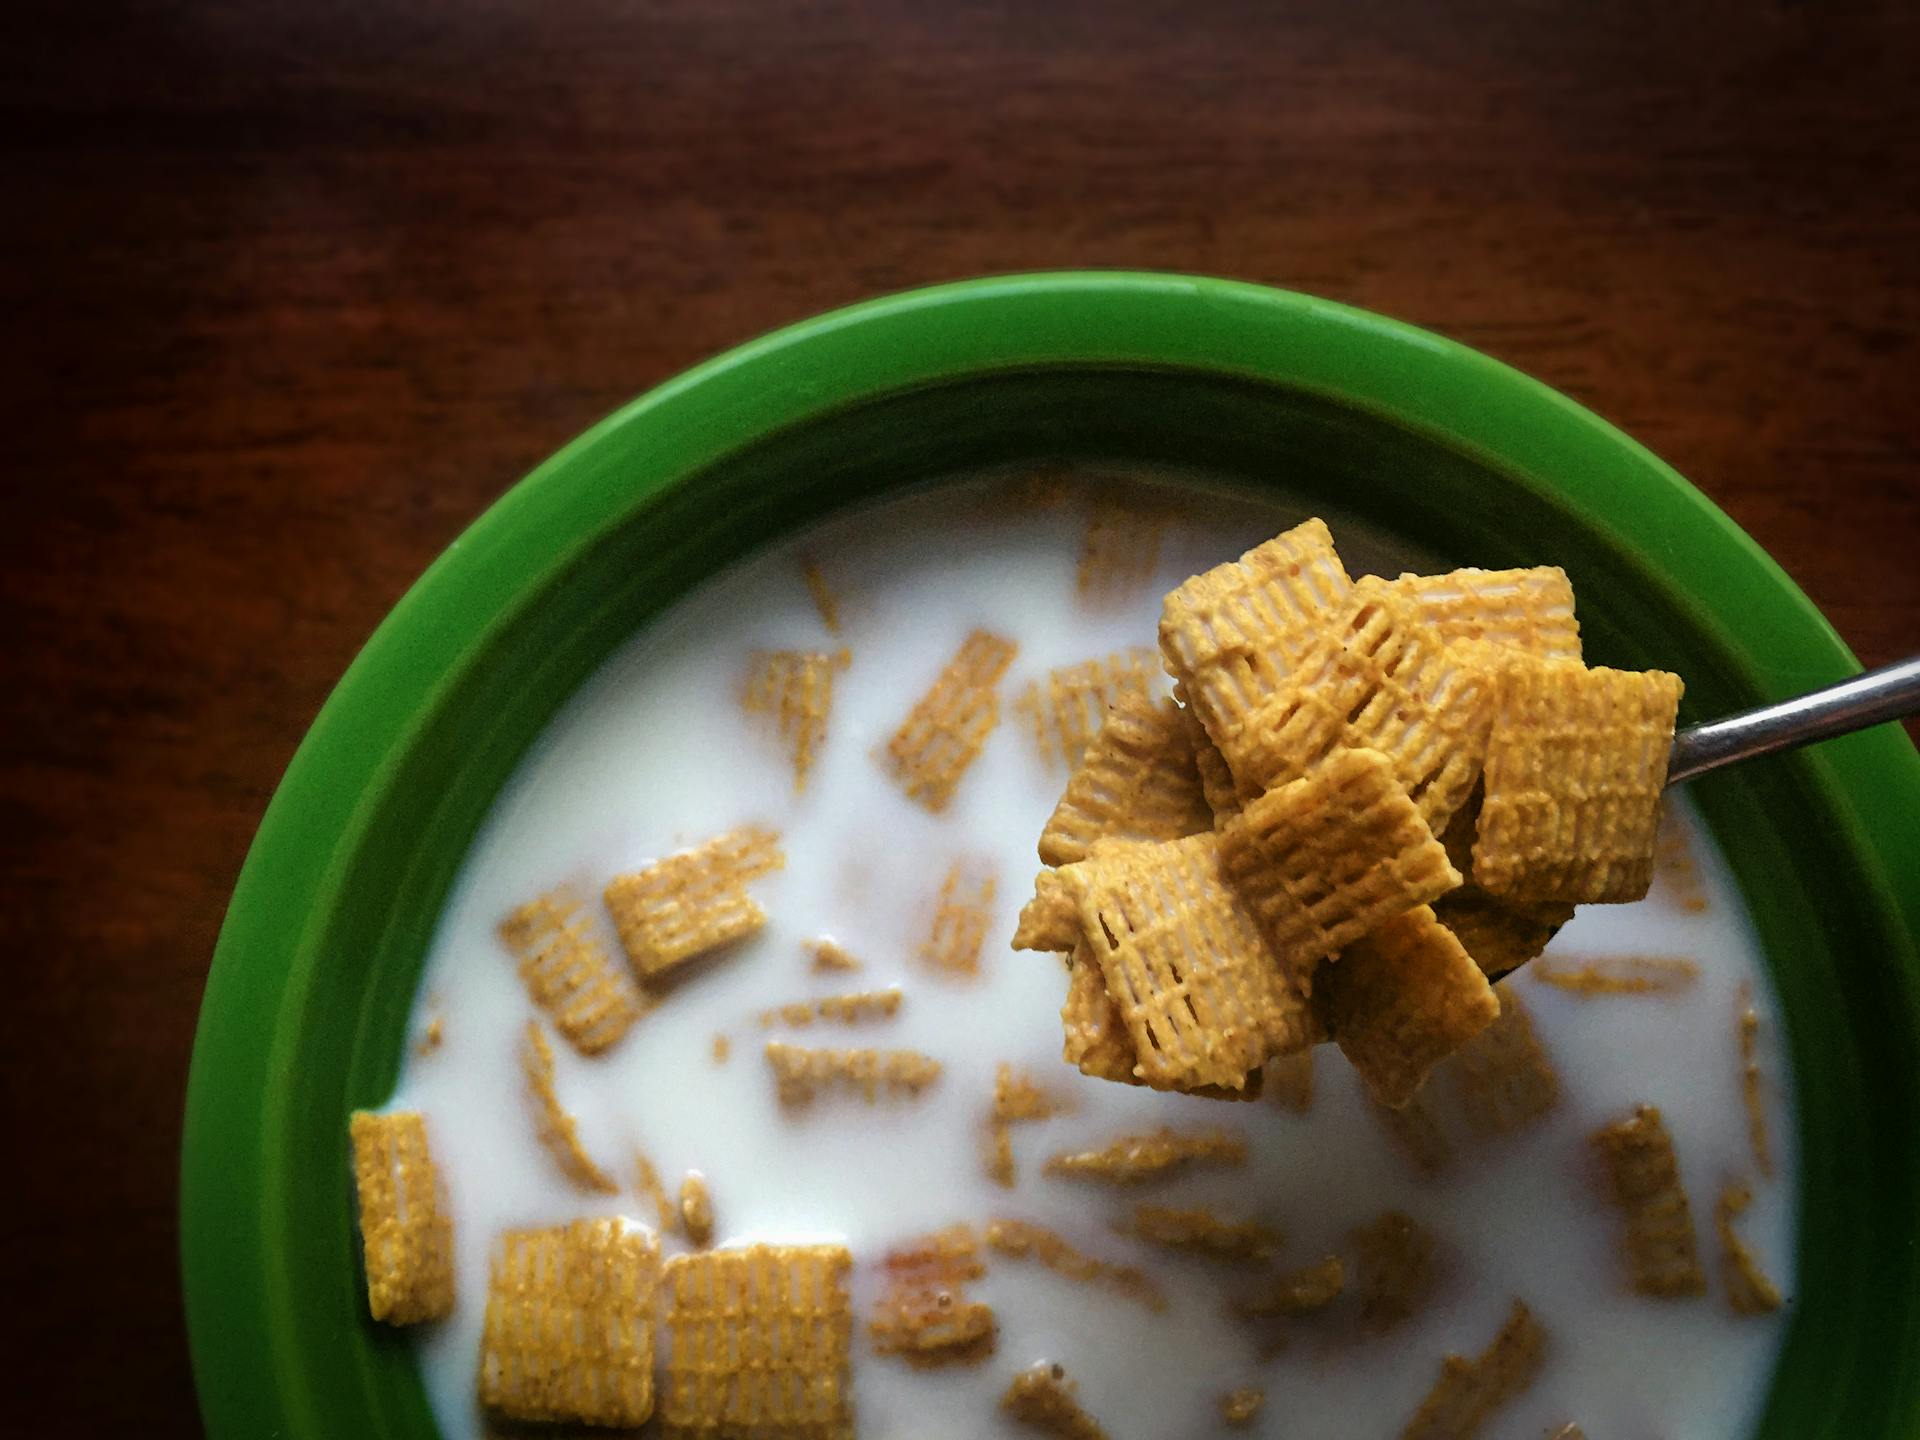 A bowl of cereal | Source: Pexels